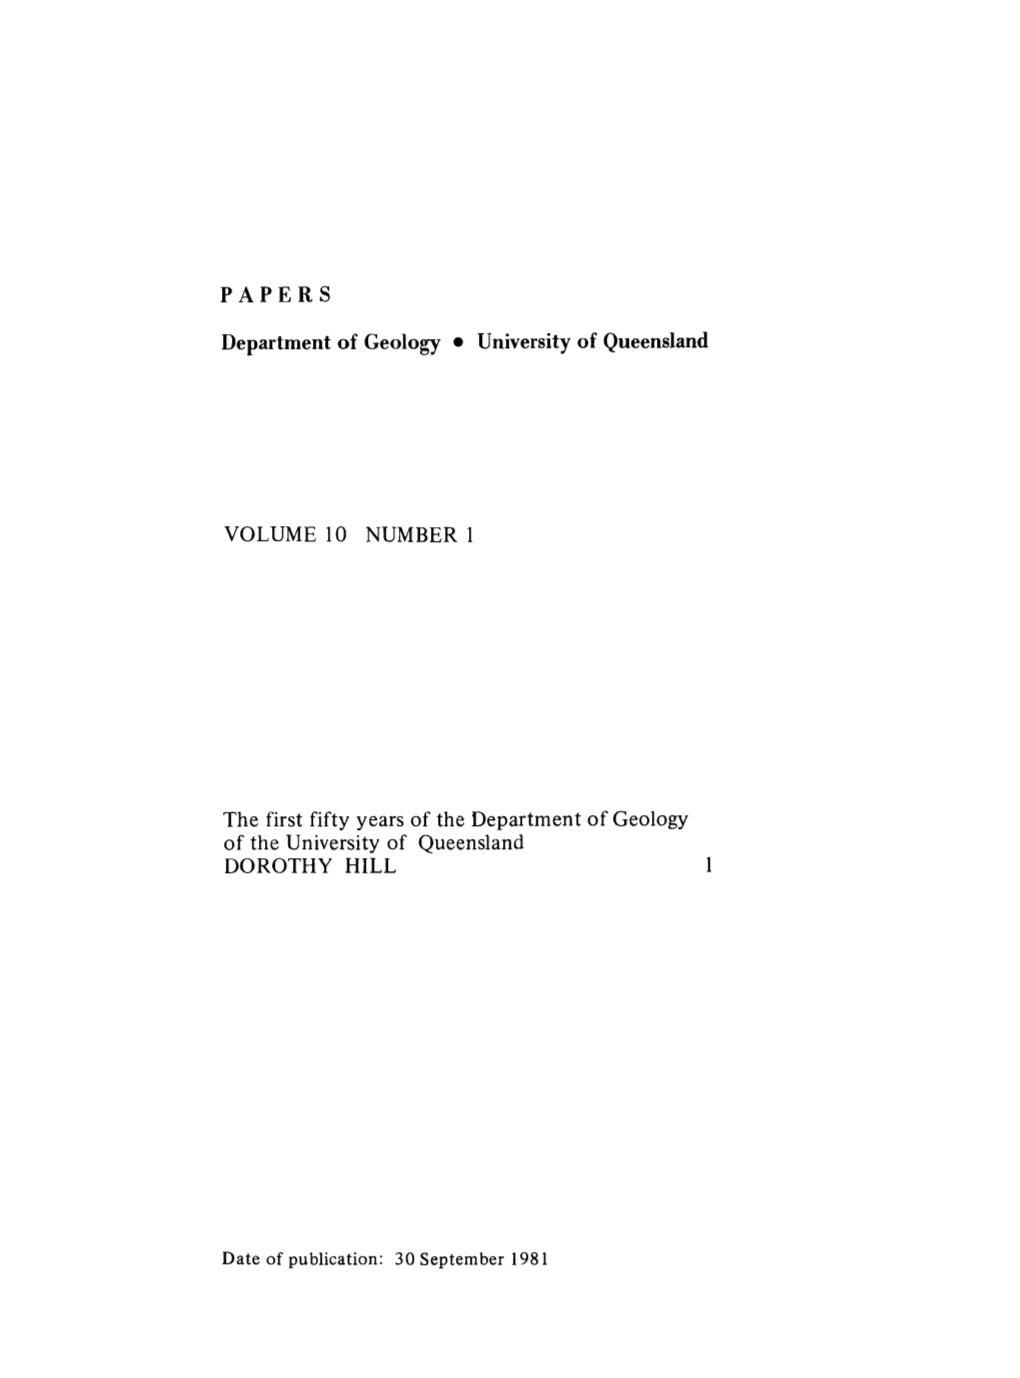 VOLUME 10 NUMBER 1 the First Fifty Years of the Department of Geology